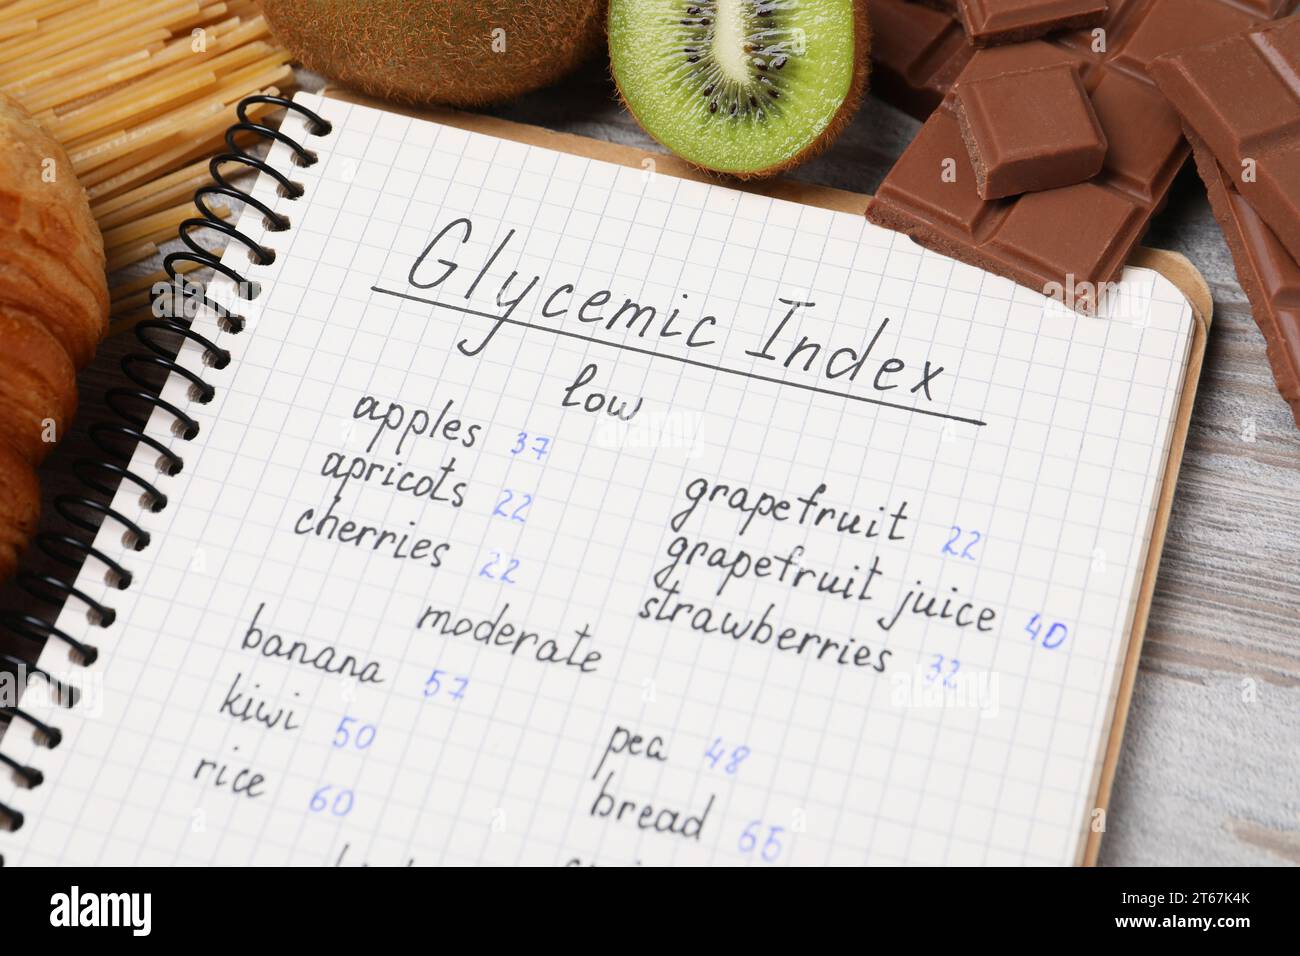 Notebook with products of low and moderate glycemic index, kiwi and chocolate on light wooden table, closeup Stock Photo